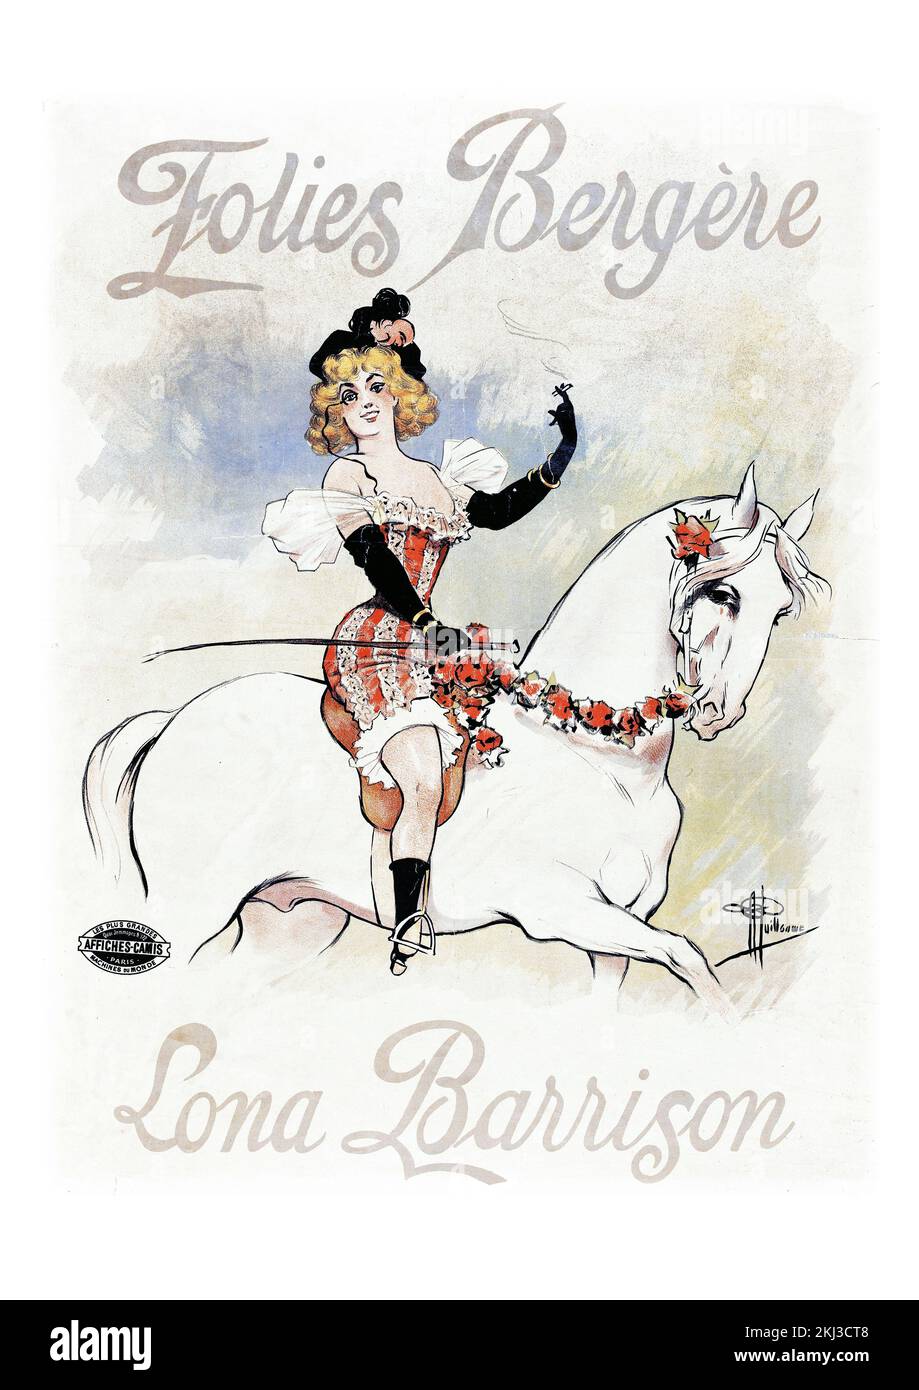 Folies-Bergère. Lona Barrison on a white horse - Vintage french poster by Guillaume, Albert (1873-1942) Stock Photo